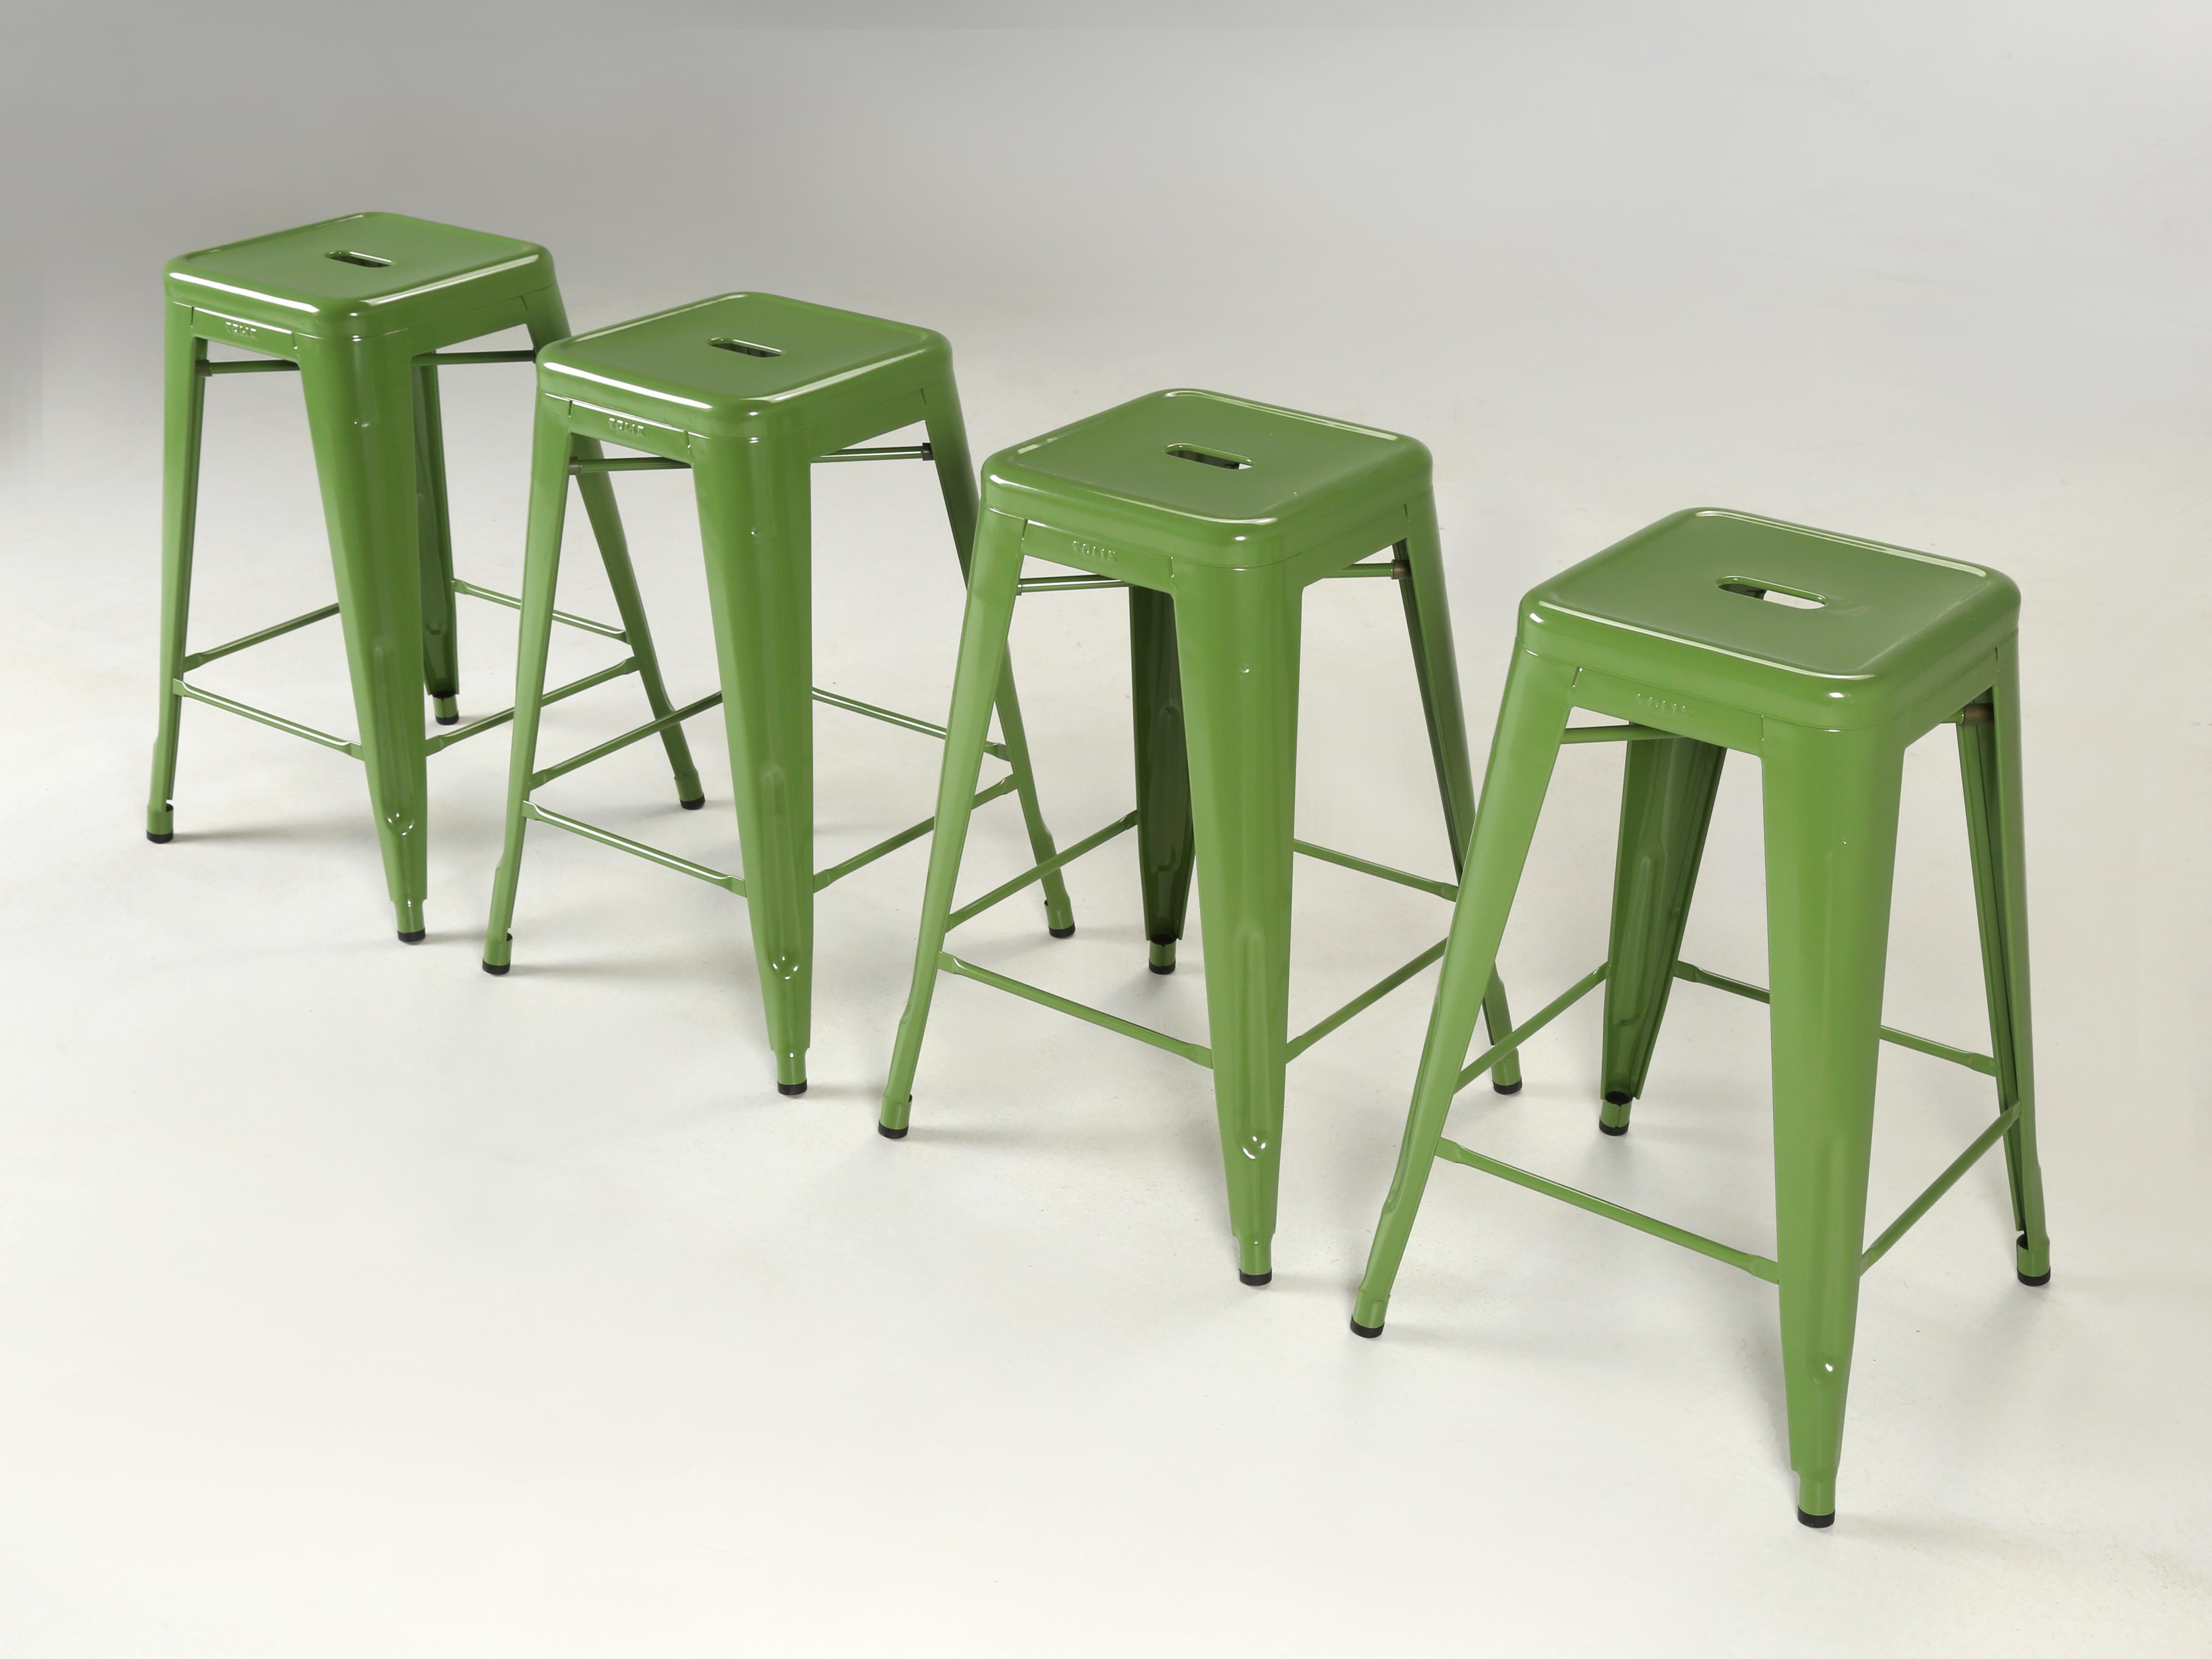 Authentic French Tolix Stacking Steel Stools in '3' Heights, Myriad of Colors  For Sale